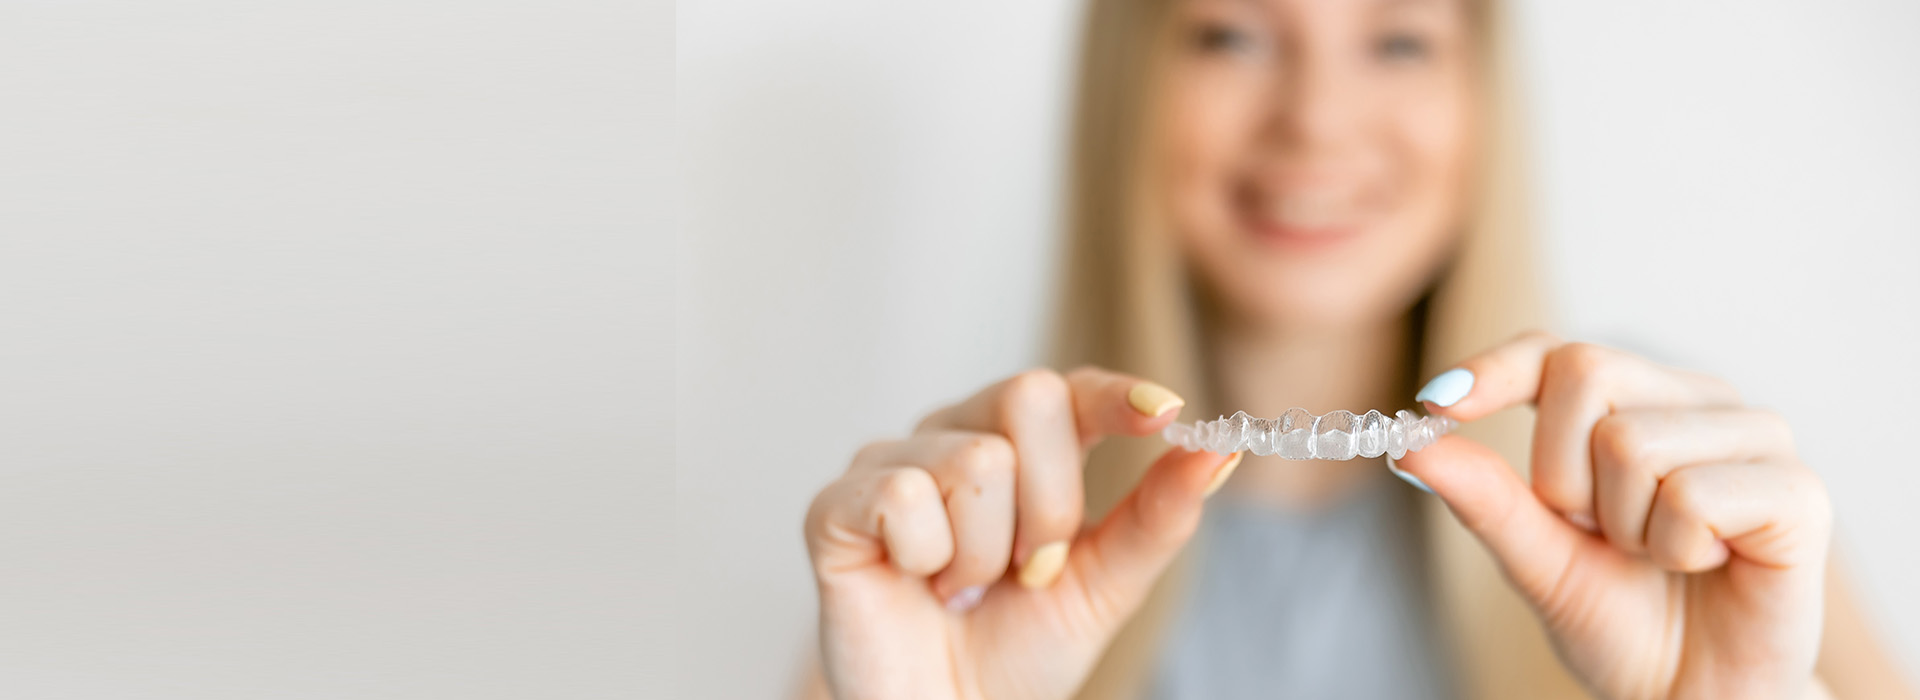 Orthodontic Associates of New England | Early Treatment, Invisalign reg  and Adult Treatment